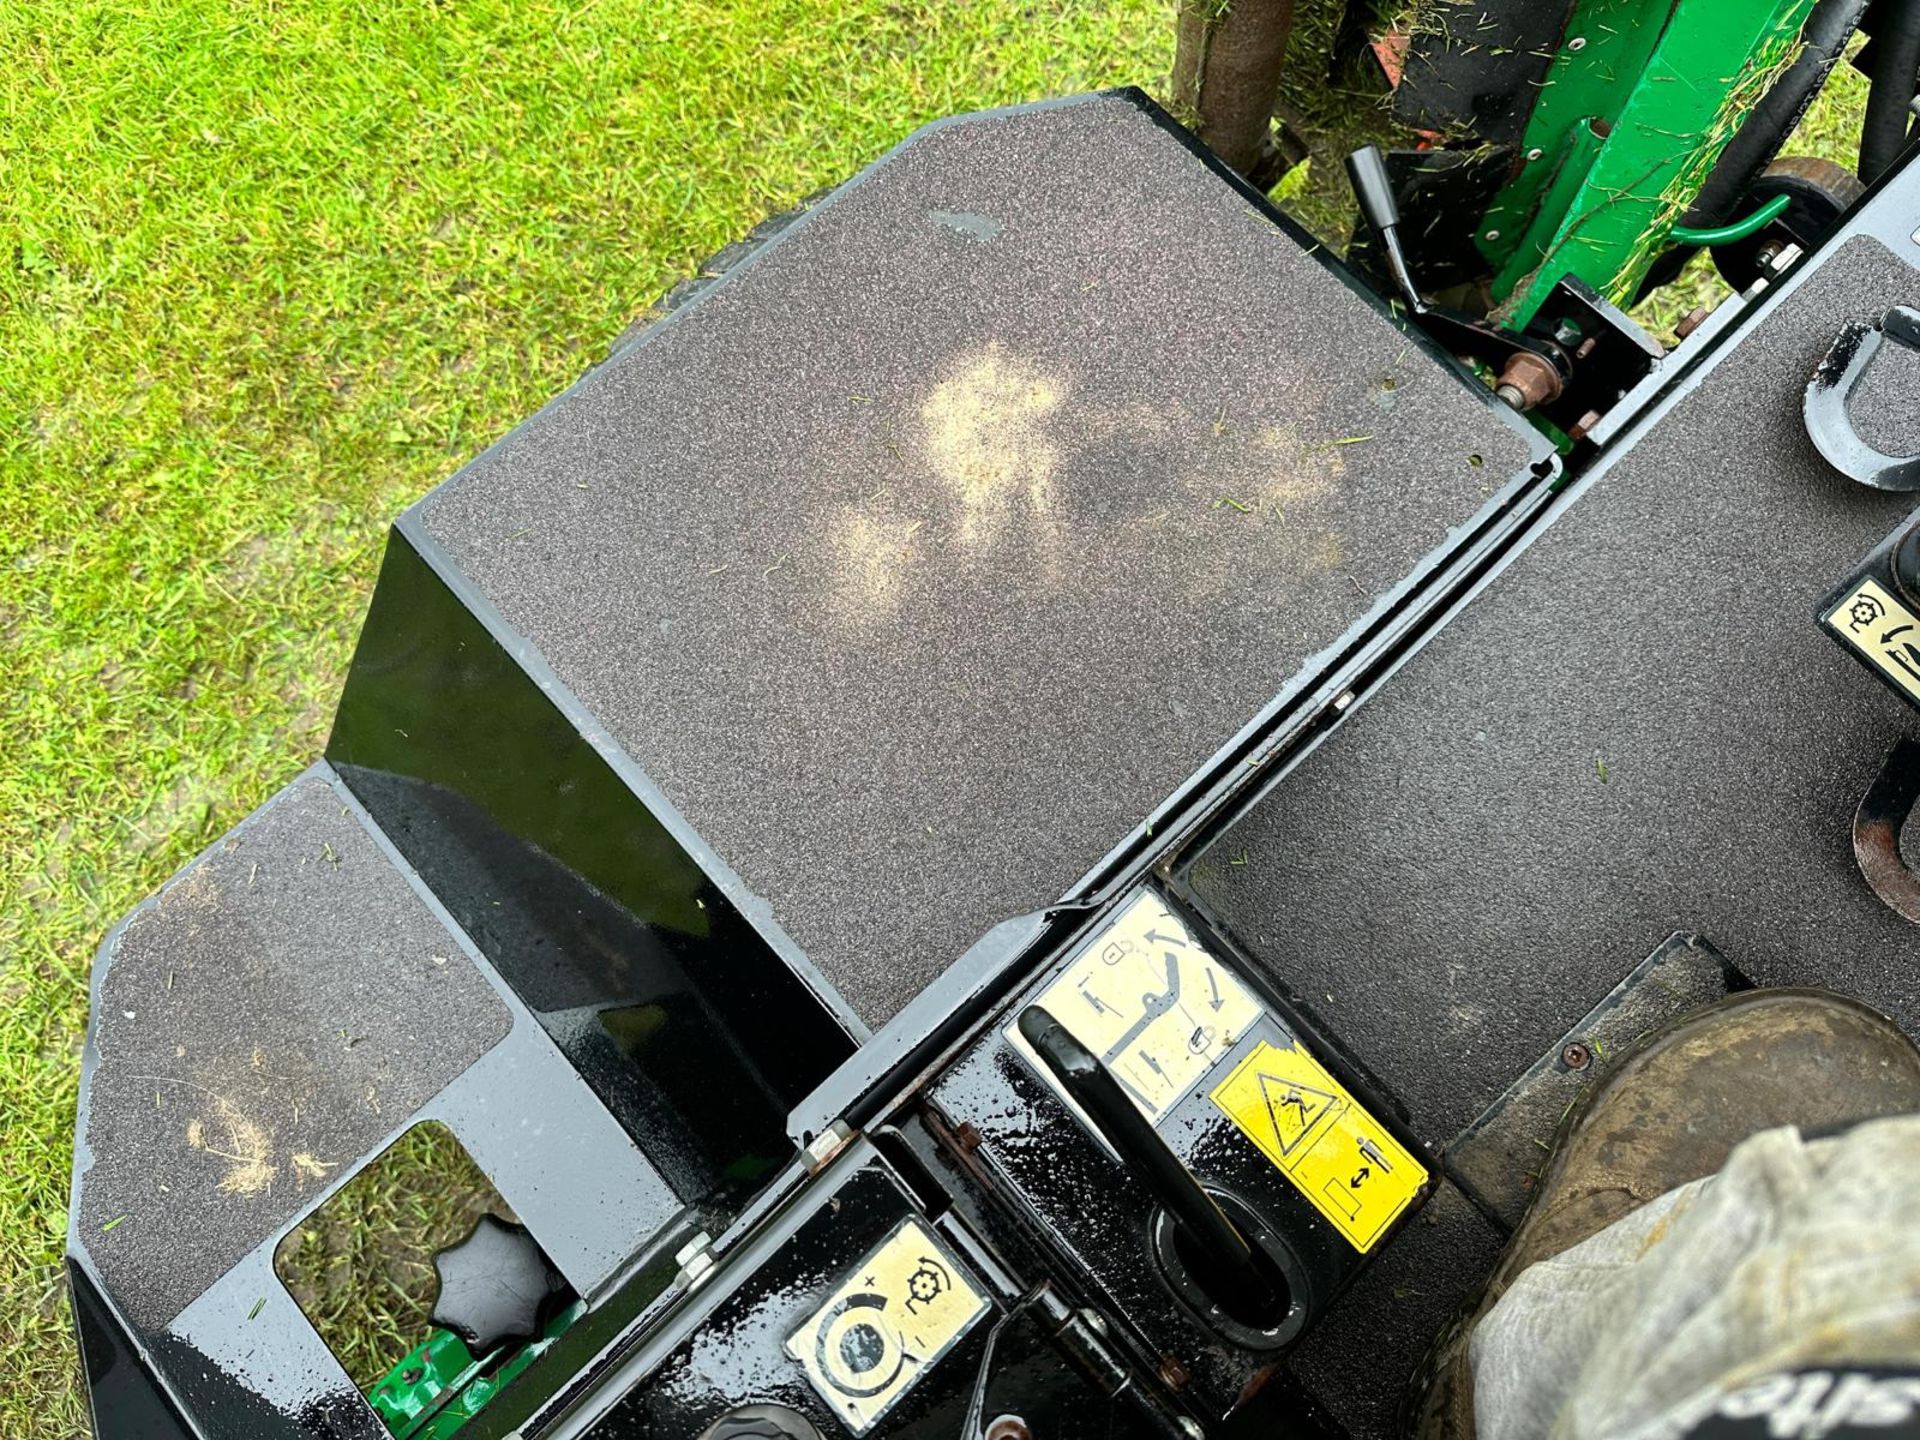 2010 RANSOMES PARKWAY 2250 PLUS 4WD 3 GANG CYLINDER MOWER *PLUS VAT* - Image 13 of 19